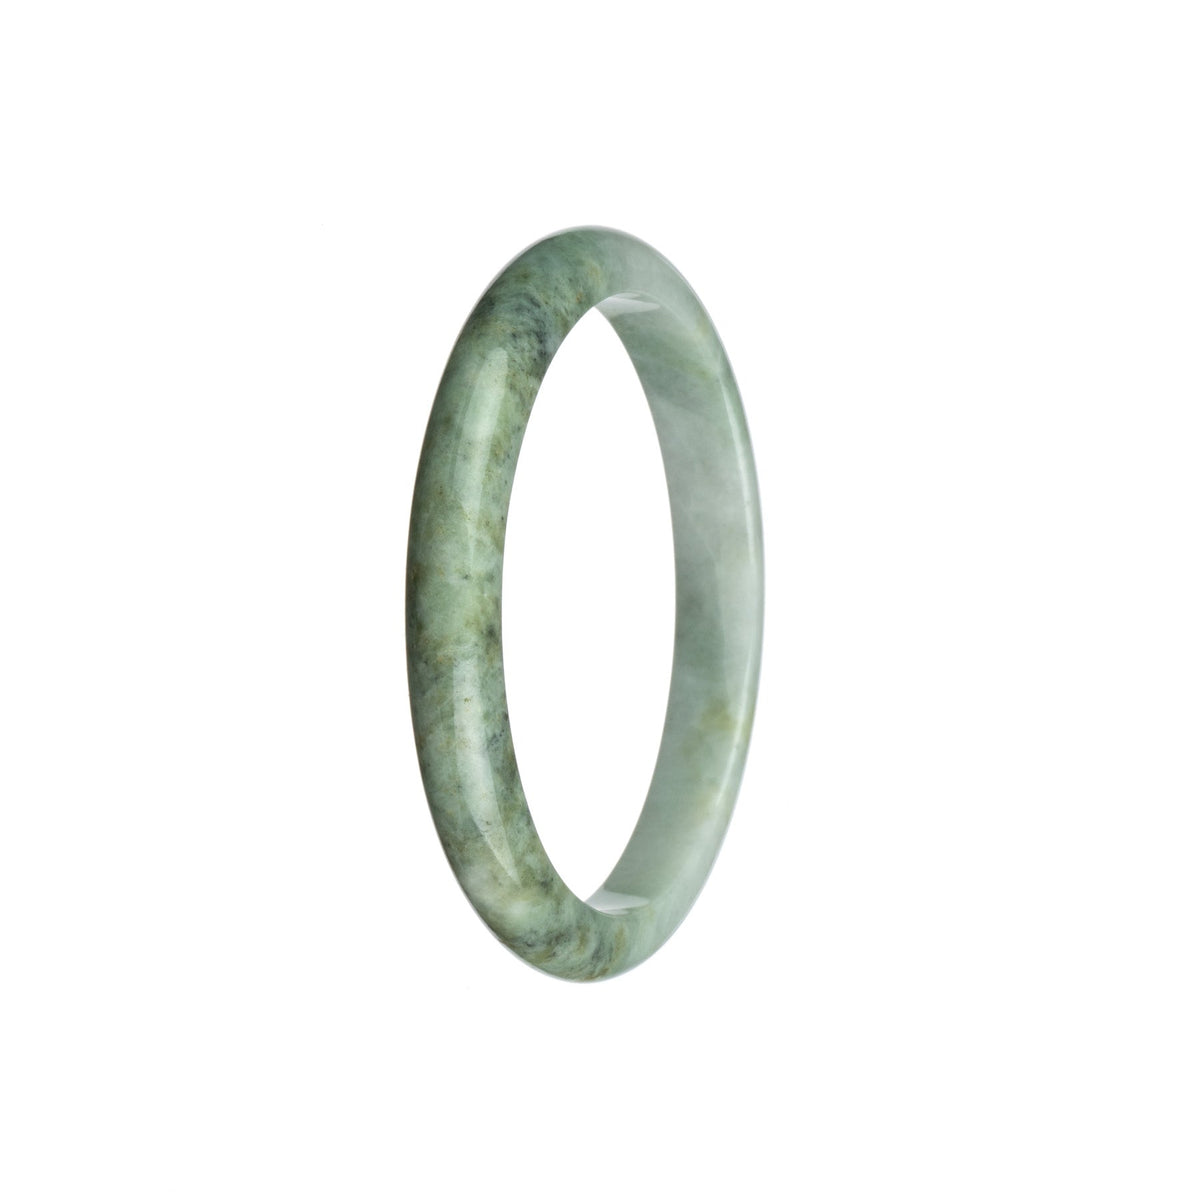 A close-up image of a traditional jade bangle with a white and grey pattern. The bangle is made of high-quality jade and has a semi-round shape, measuring 53mm in diameter. It is certified as Grade A jade and is part of the MAYS™ collection.